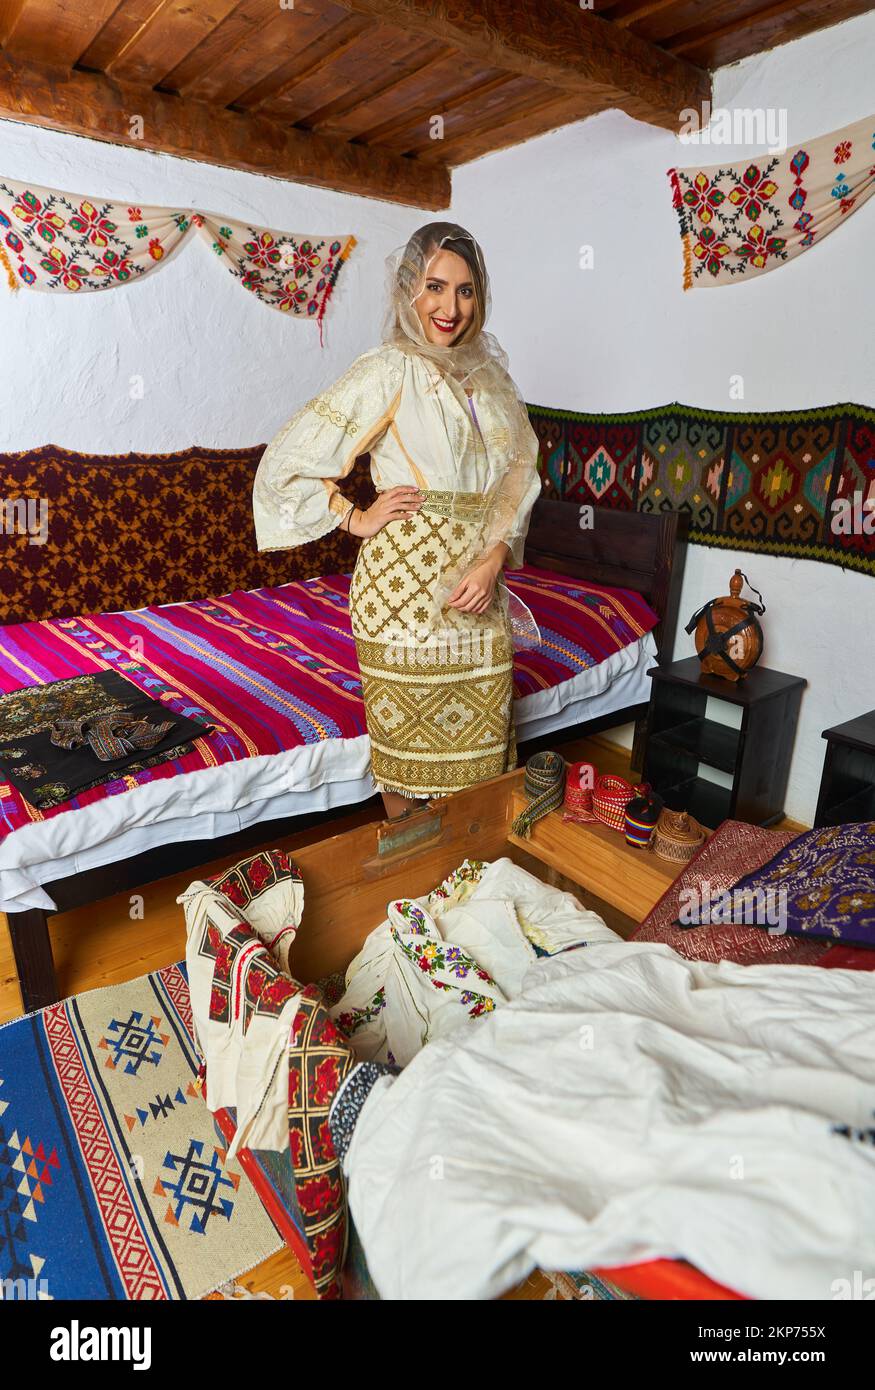 Young Romanian woman in traditional bride popular costume in a vintage home Stock Photo